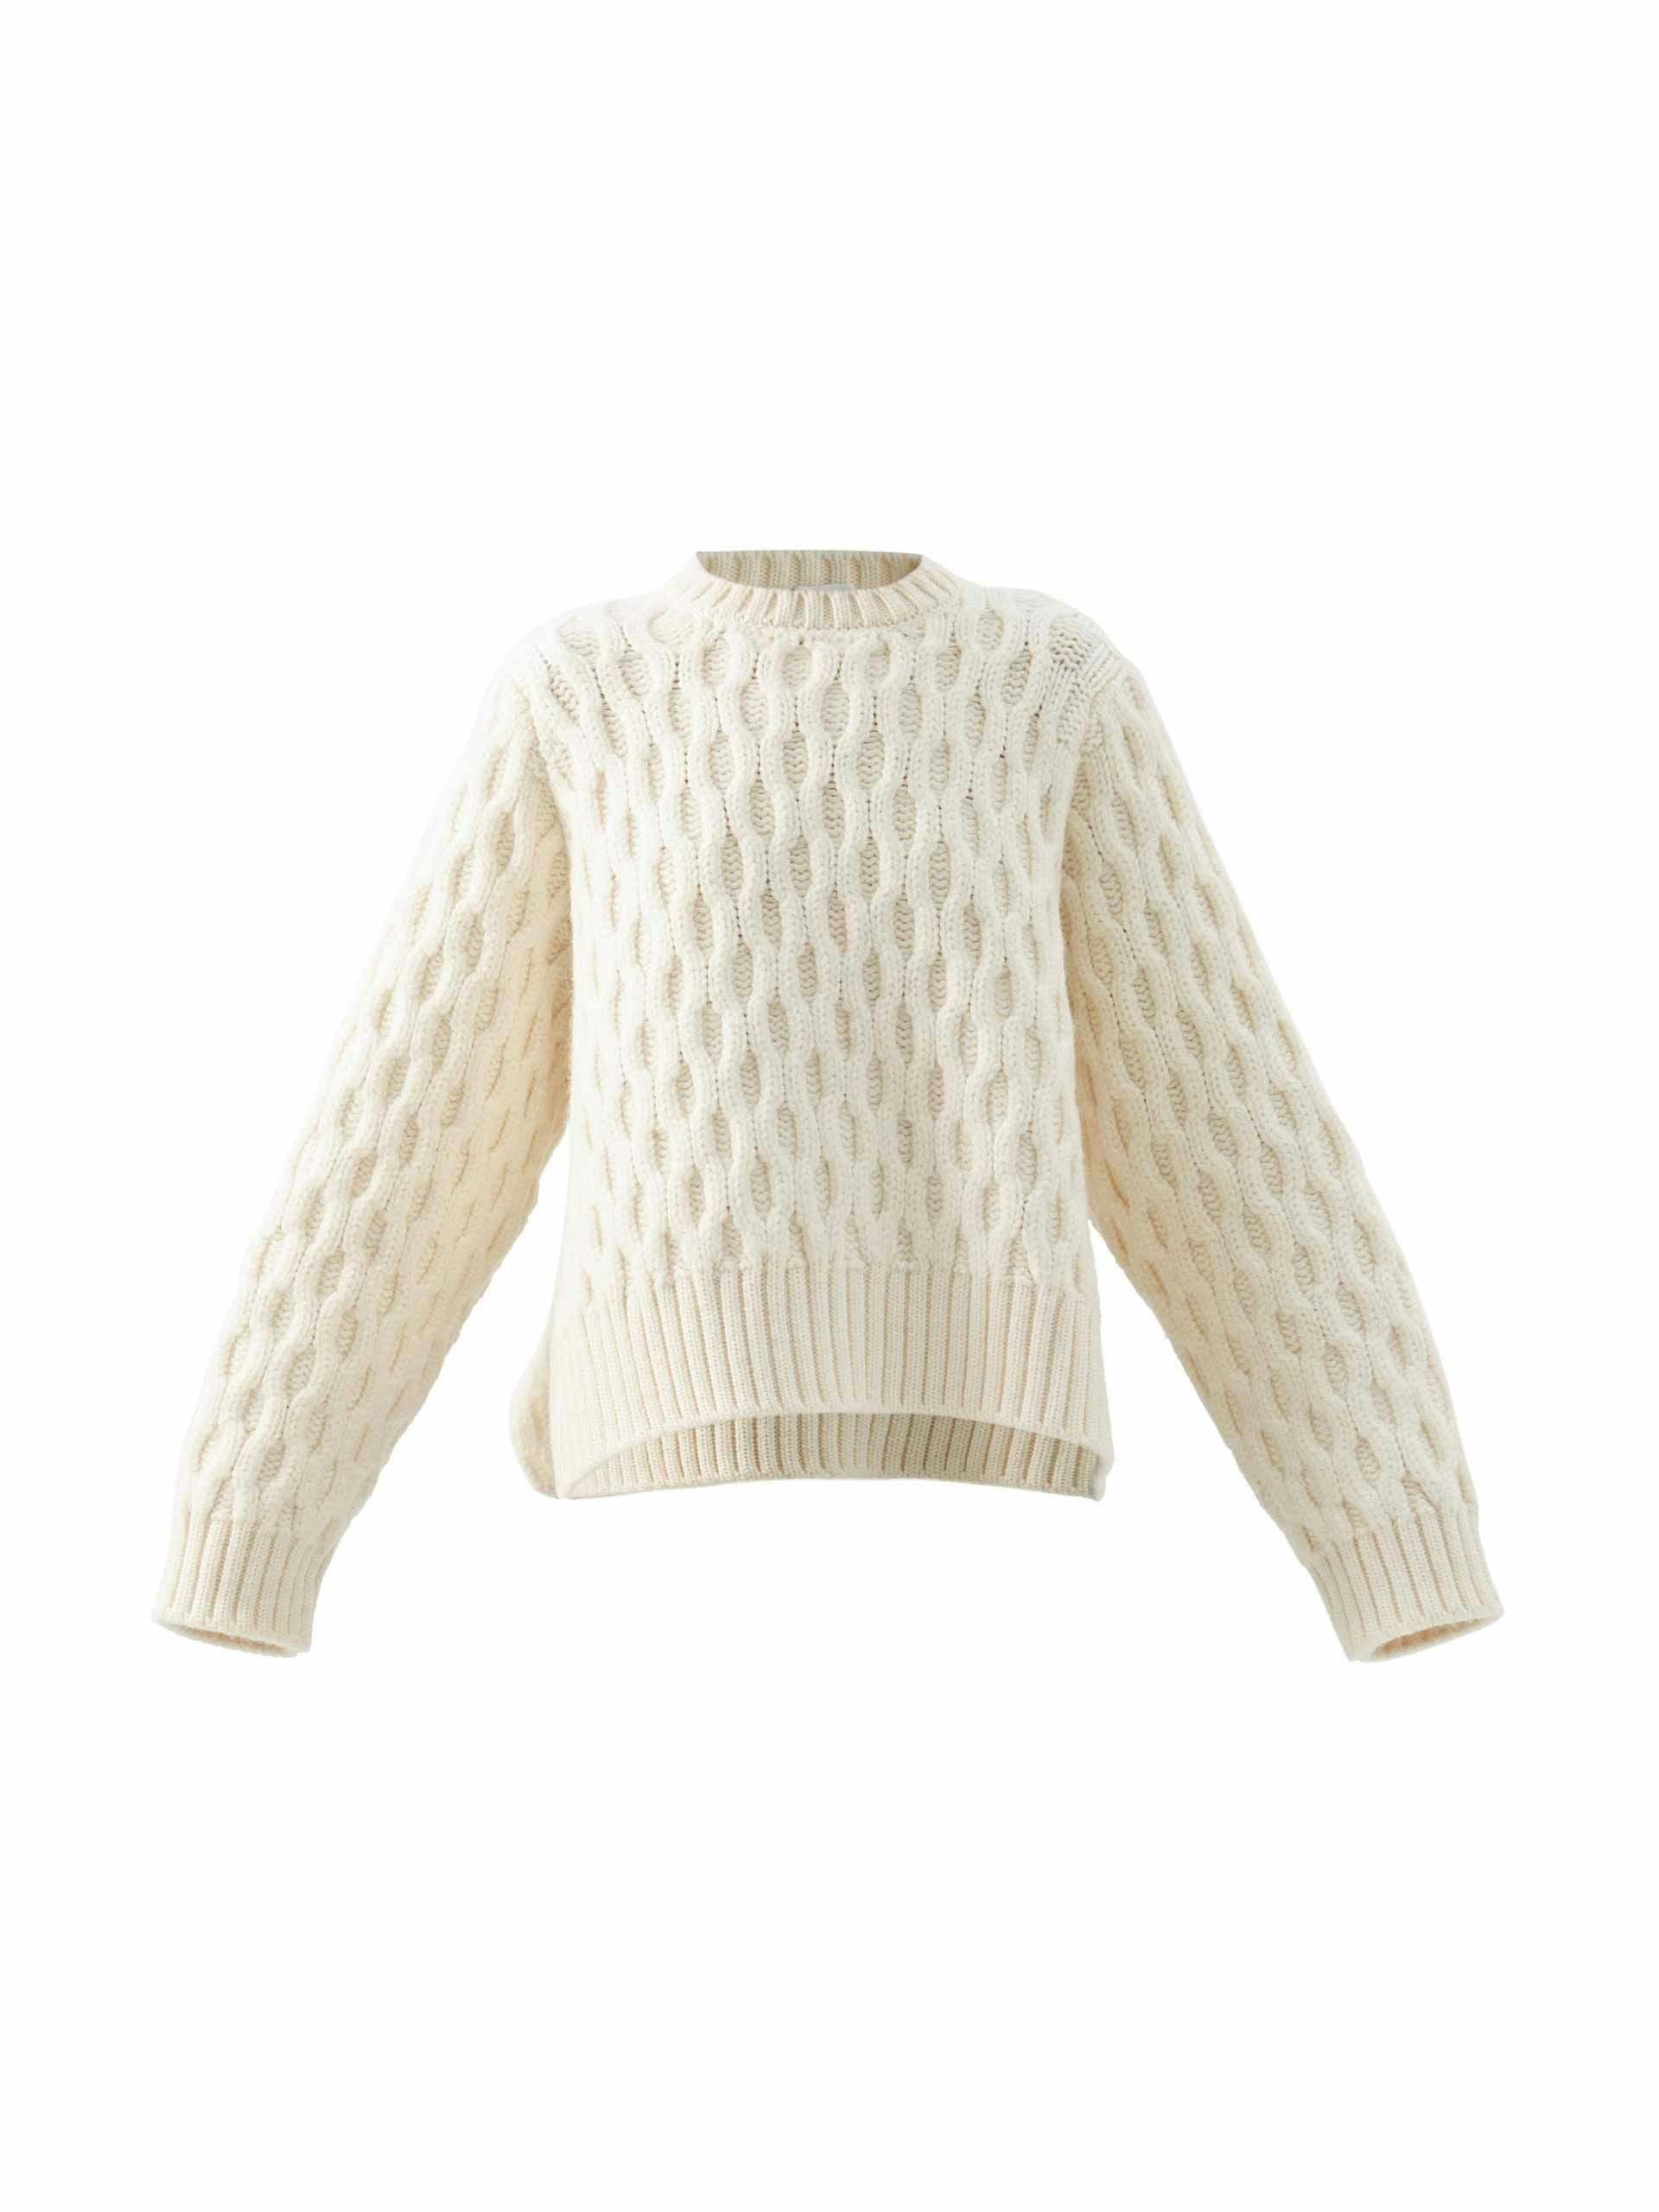 Organic-wool blend cable knit sweater